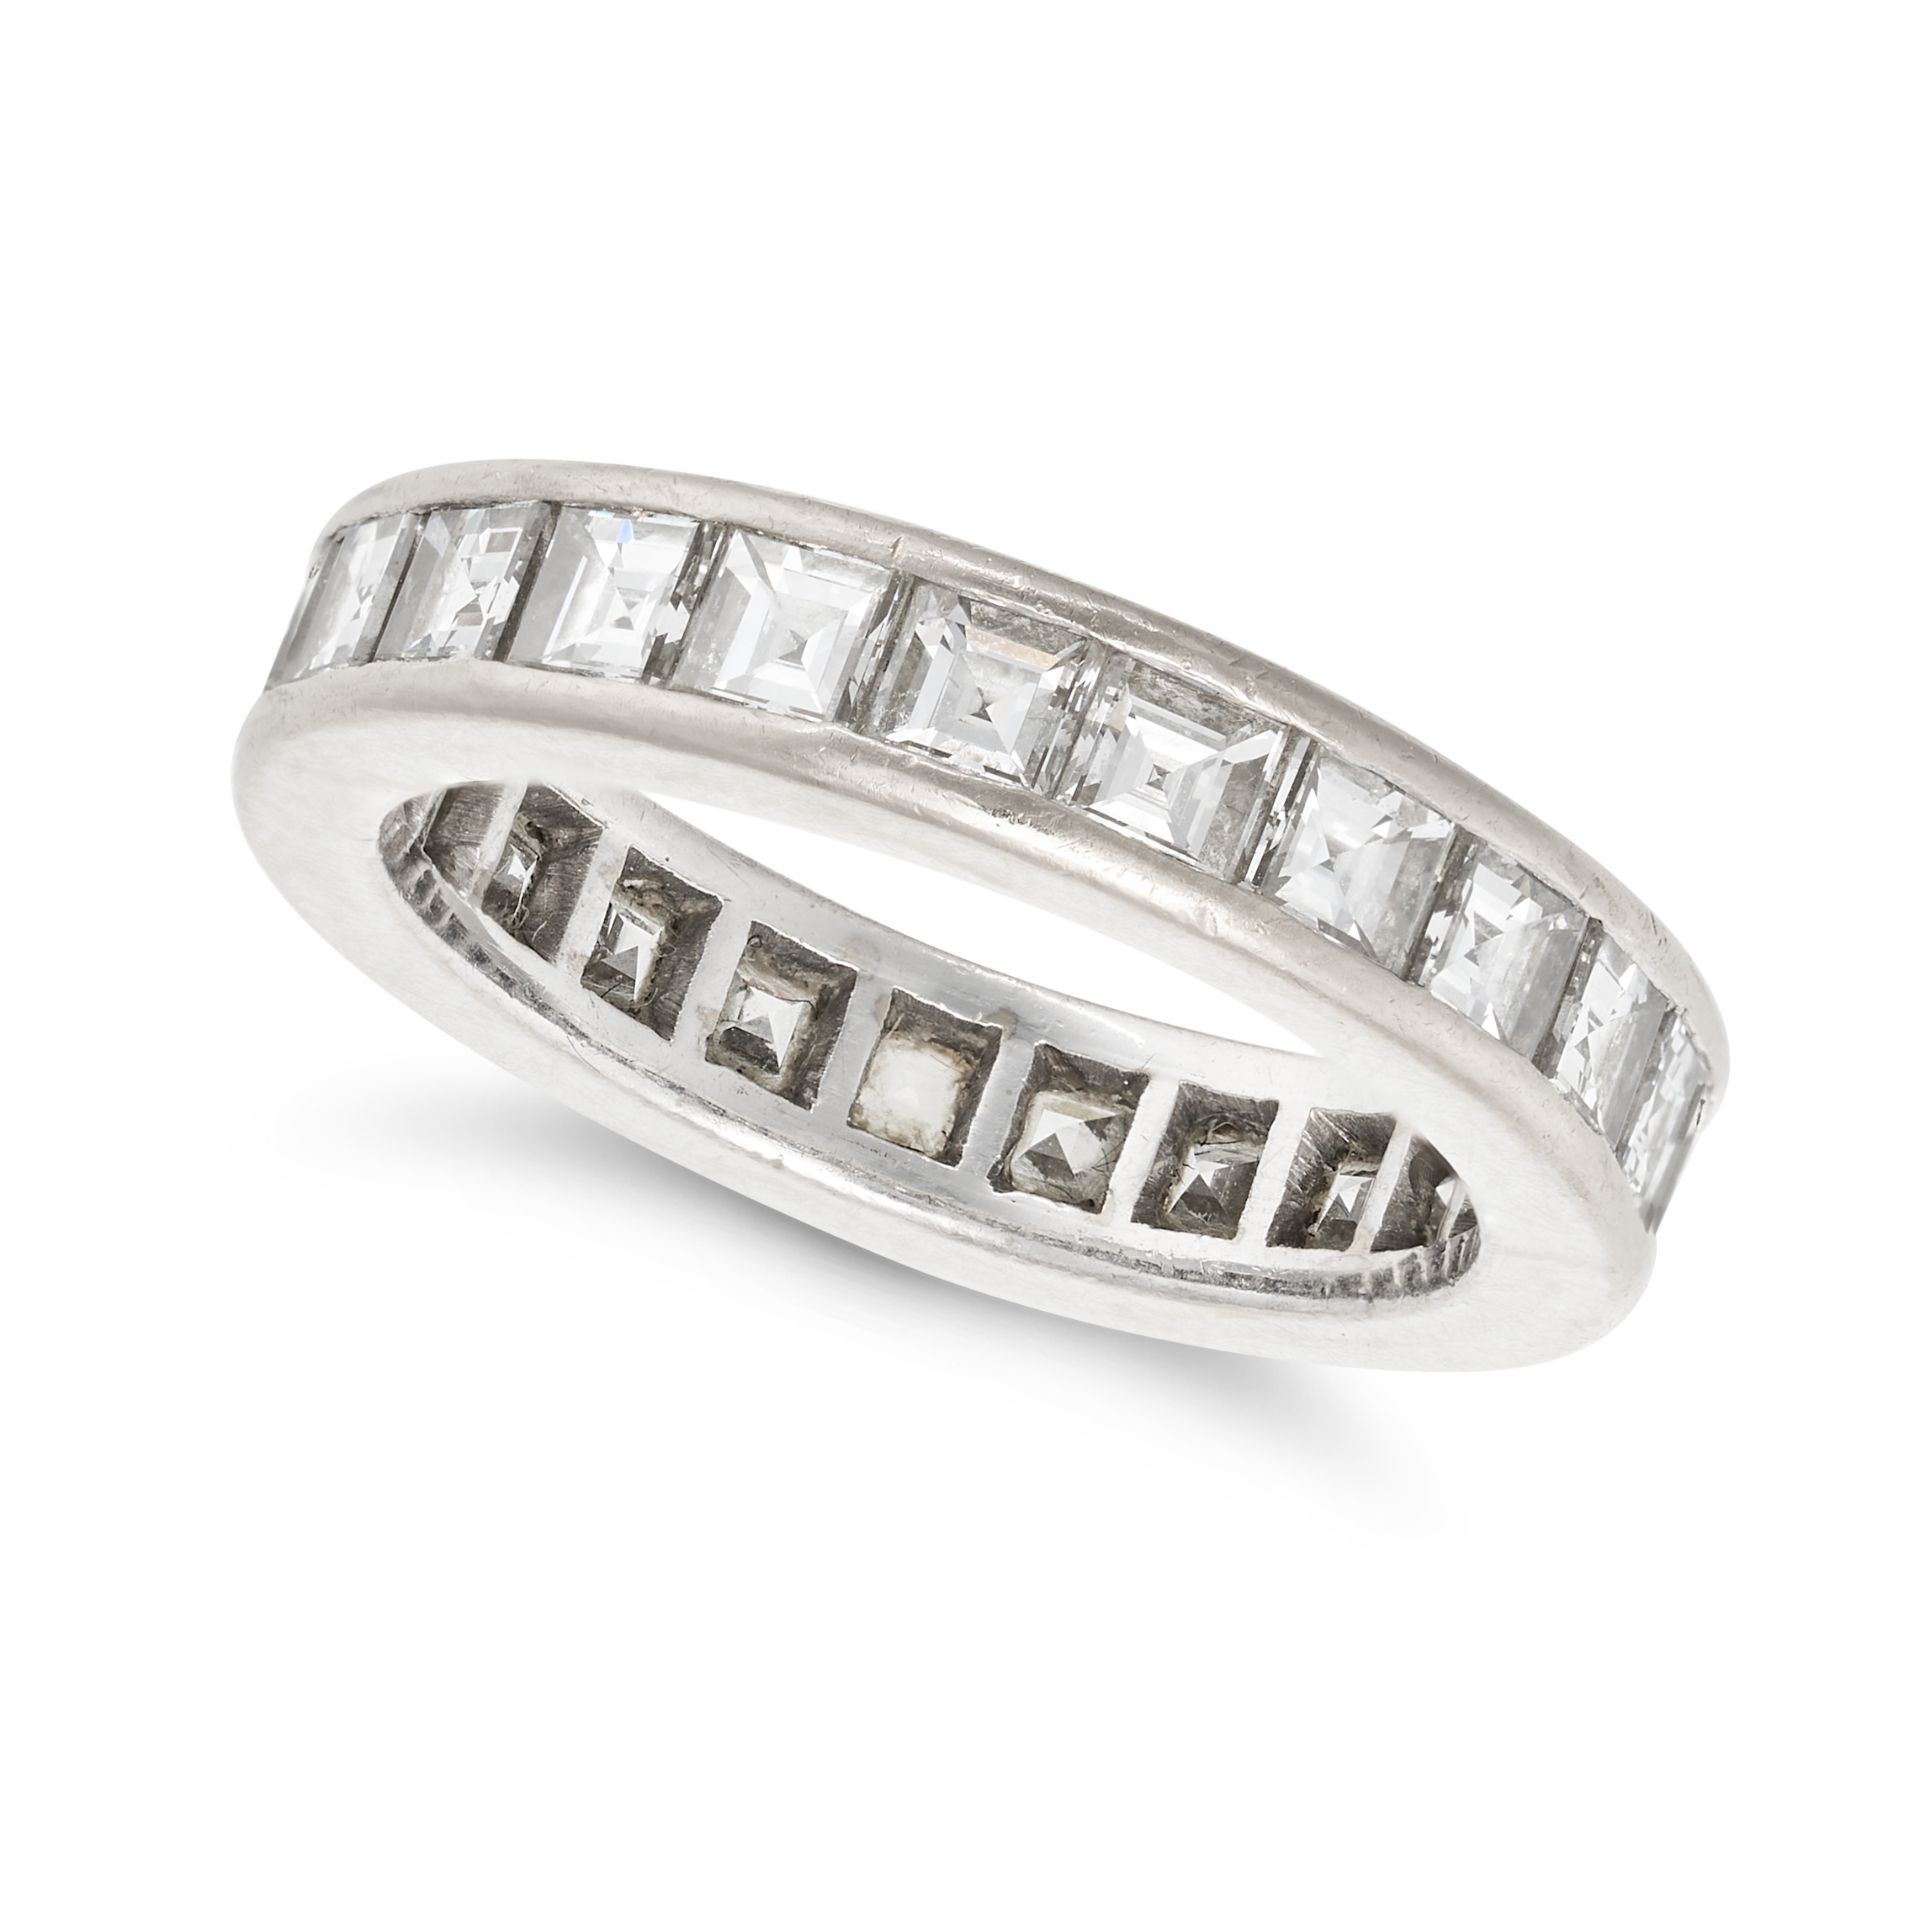 A DIAMOND FULL ETERNITY RING in white gold, set all around with a row of carre cut diamonds, the ...